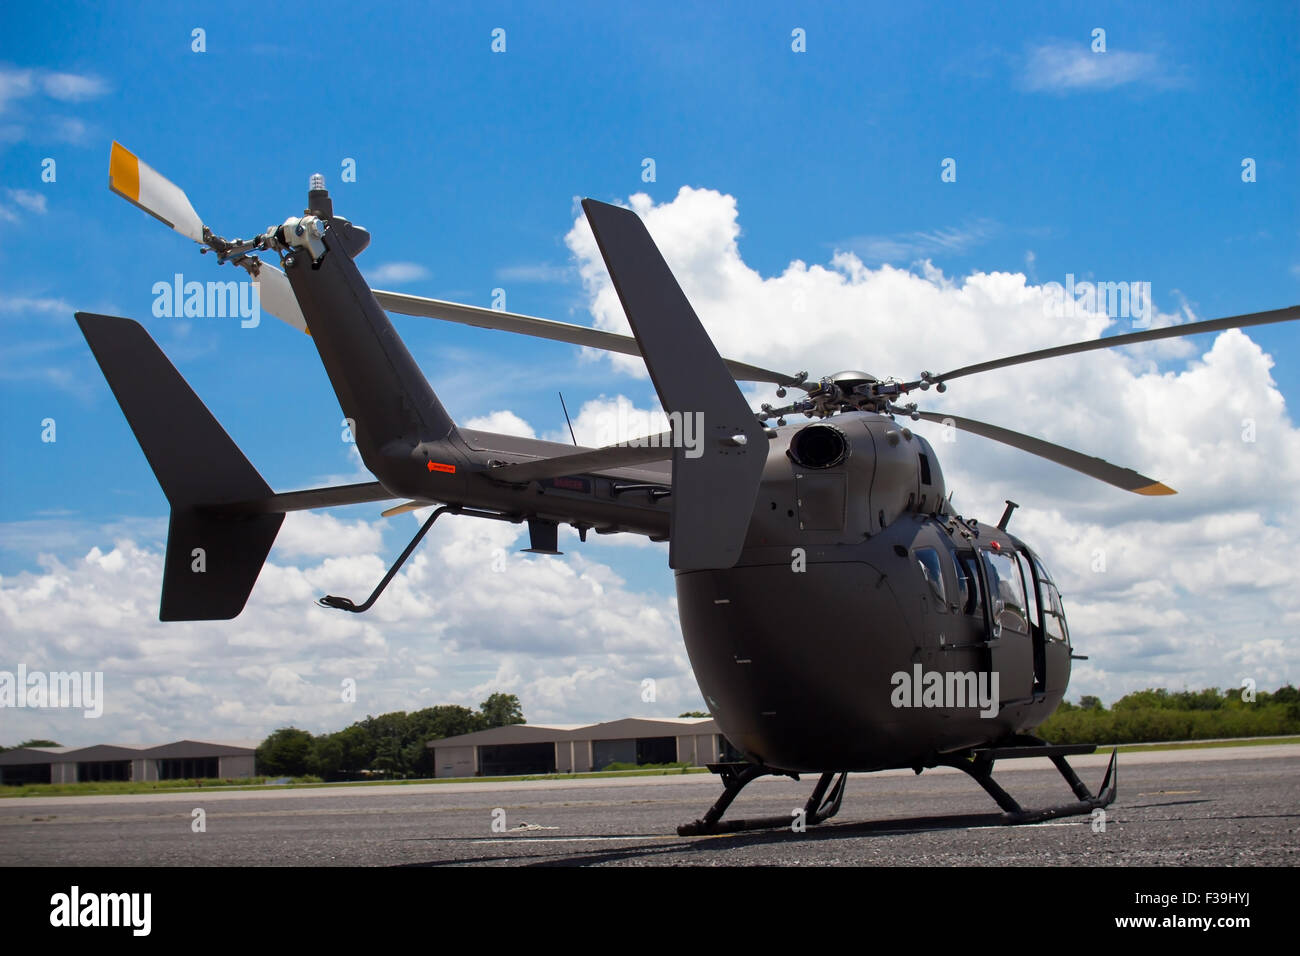 Helicopter static display on the ground Stock Photo